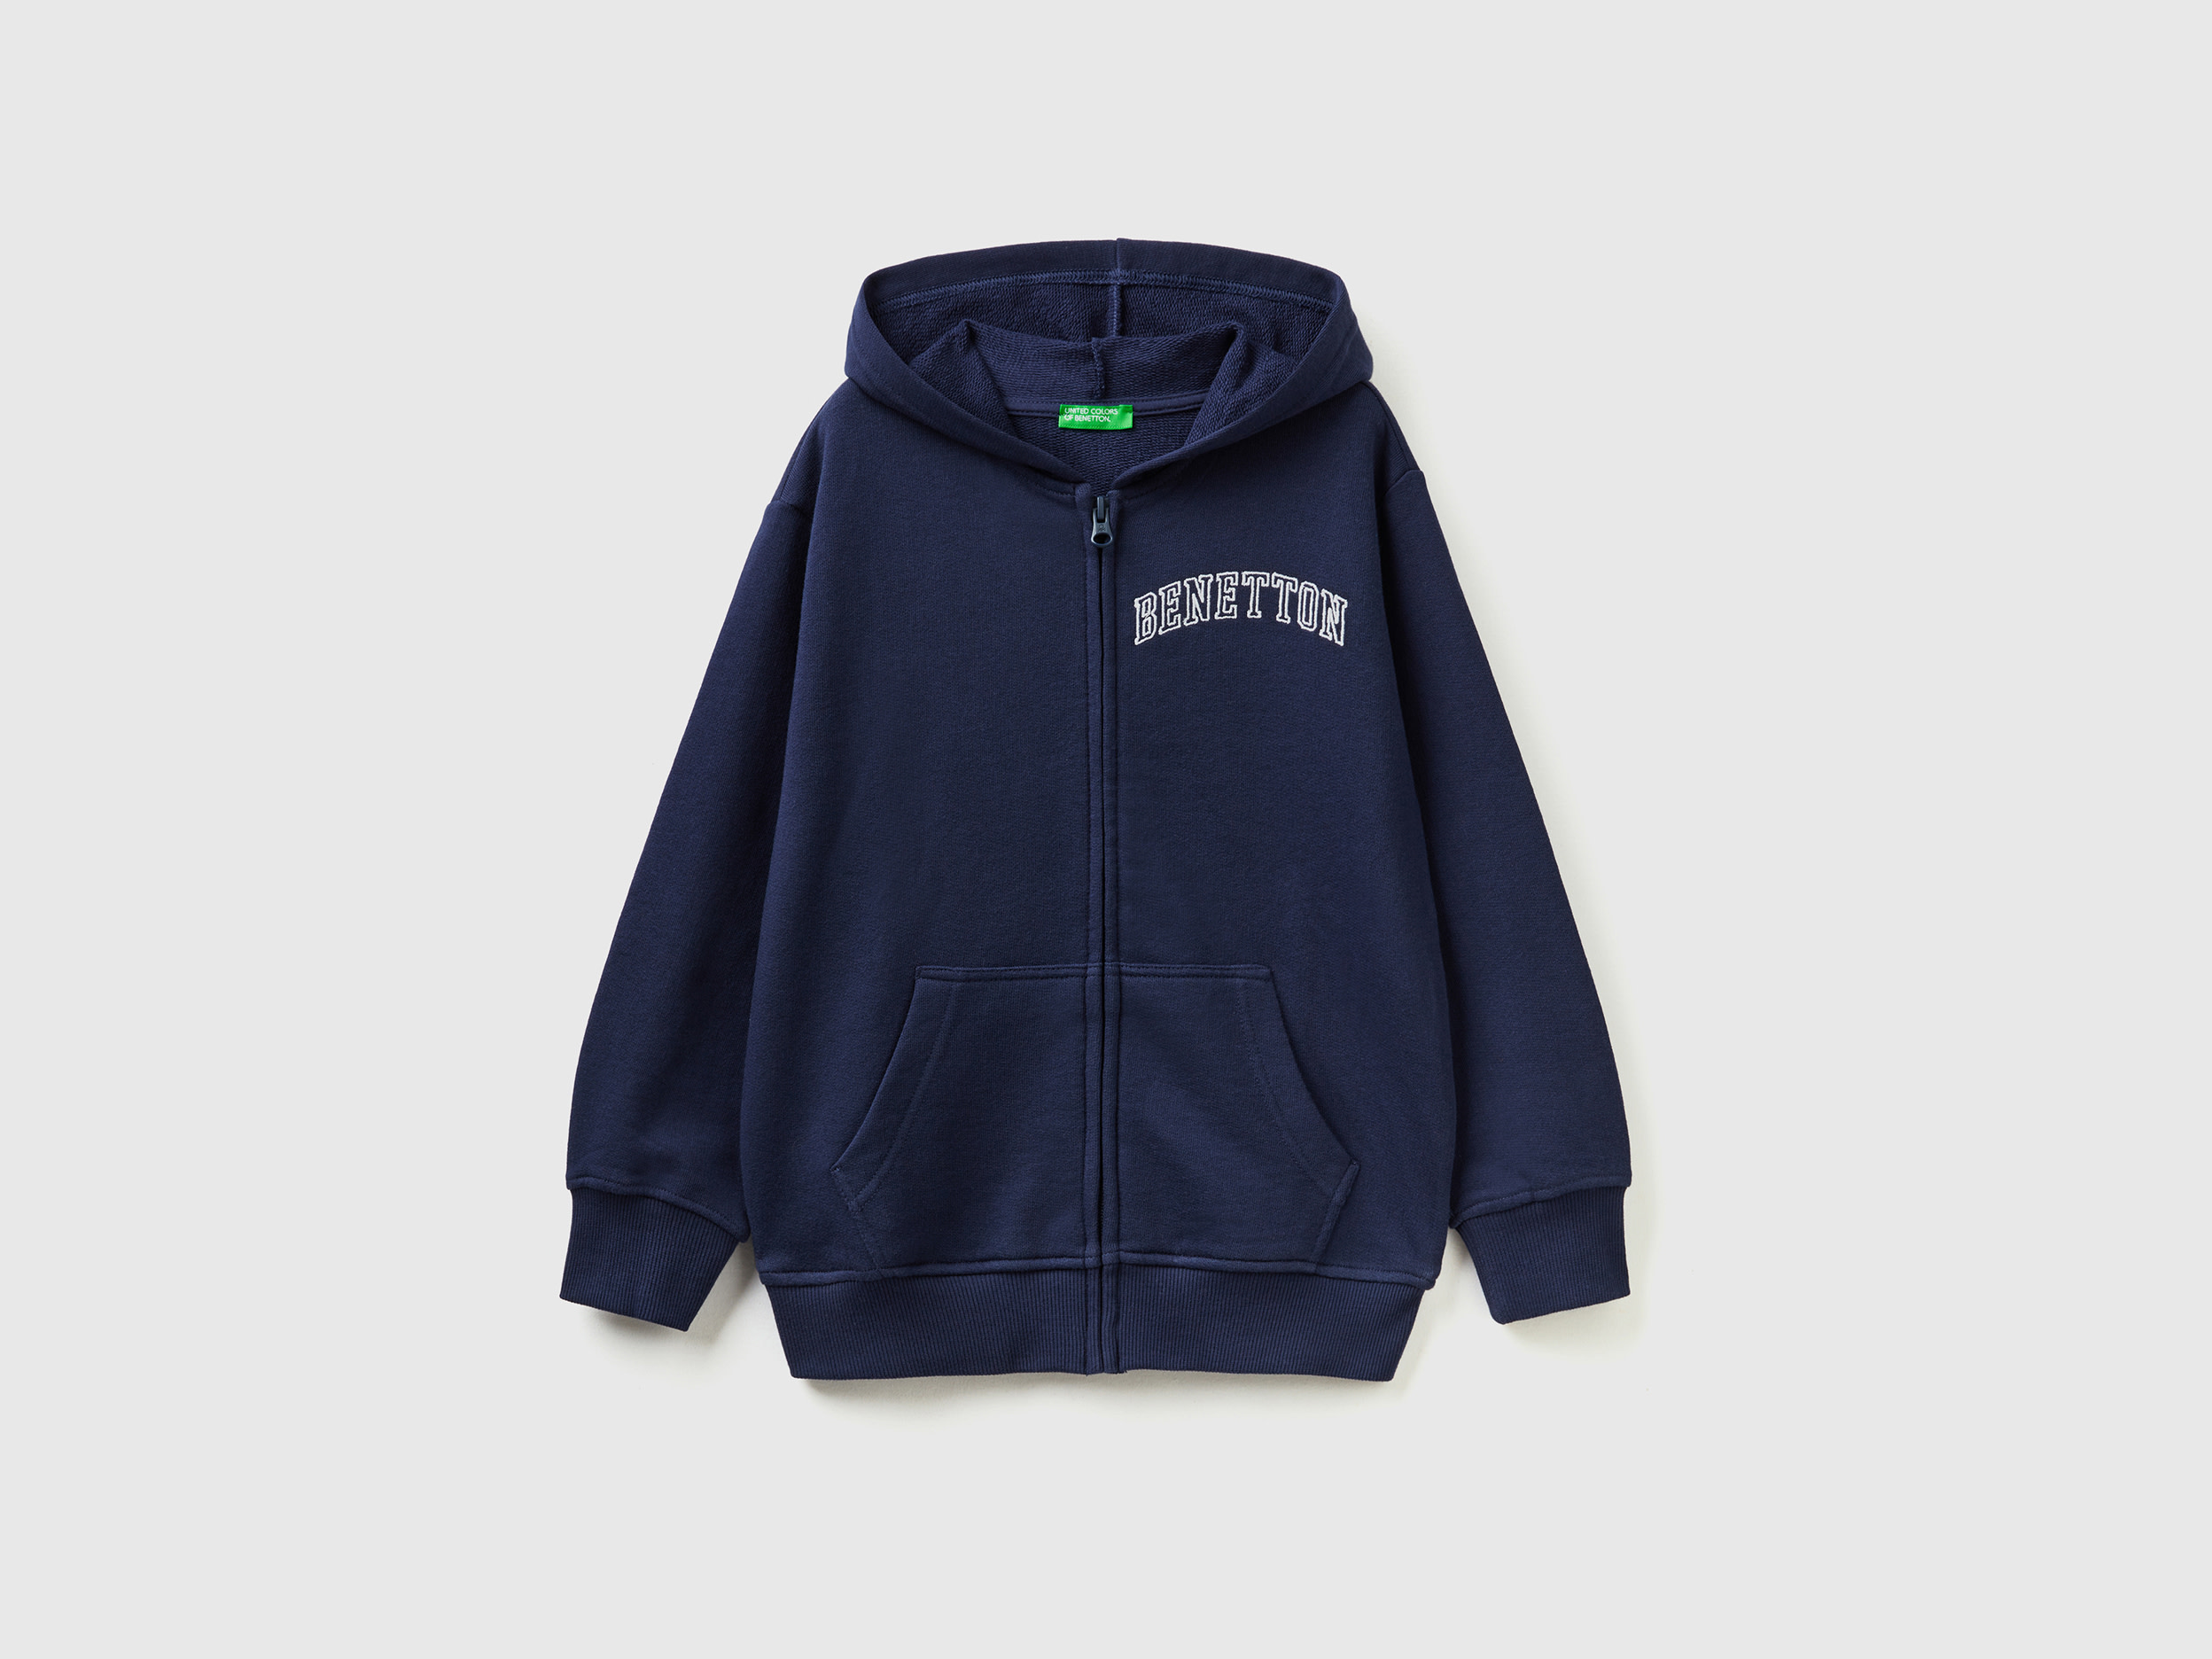 Benetton, Hoodie With Zip And Embroidered Logo, size M, Dark Blue, Kids